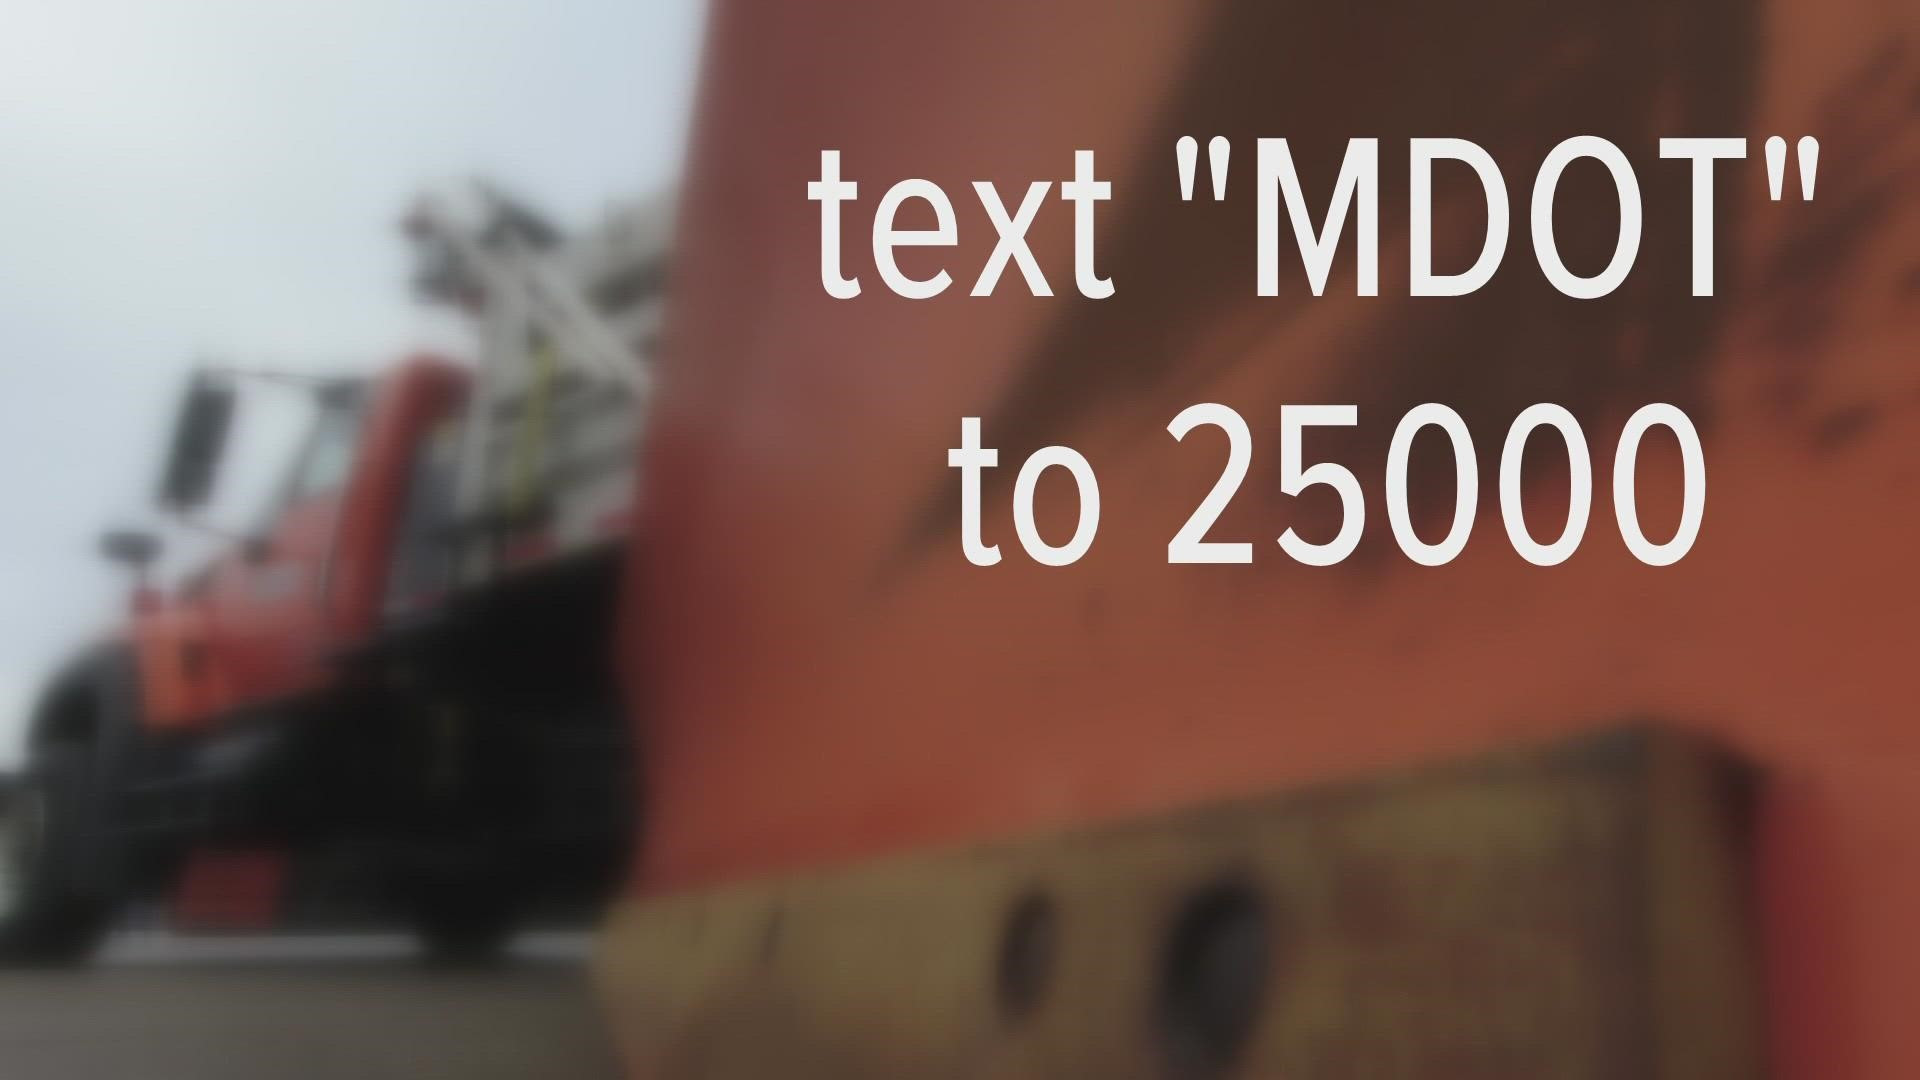 MDOT is hosting virtual career fairs to help fill a number of seasonal and permanent positions. To attend, simply text “MDOT" to 25000.